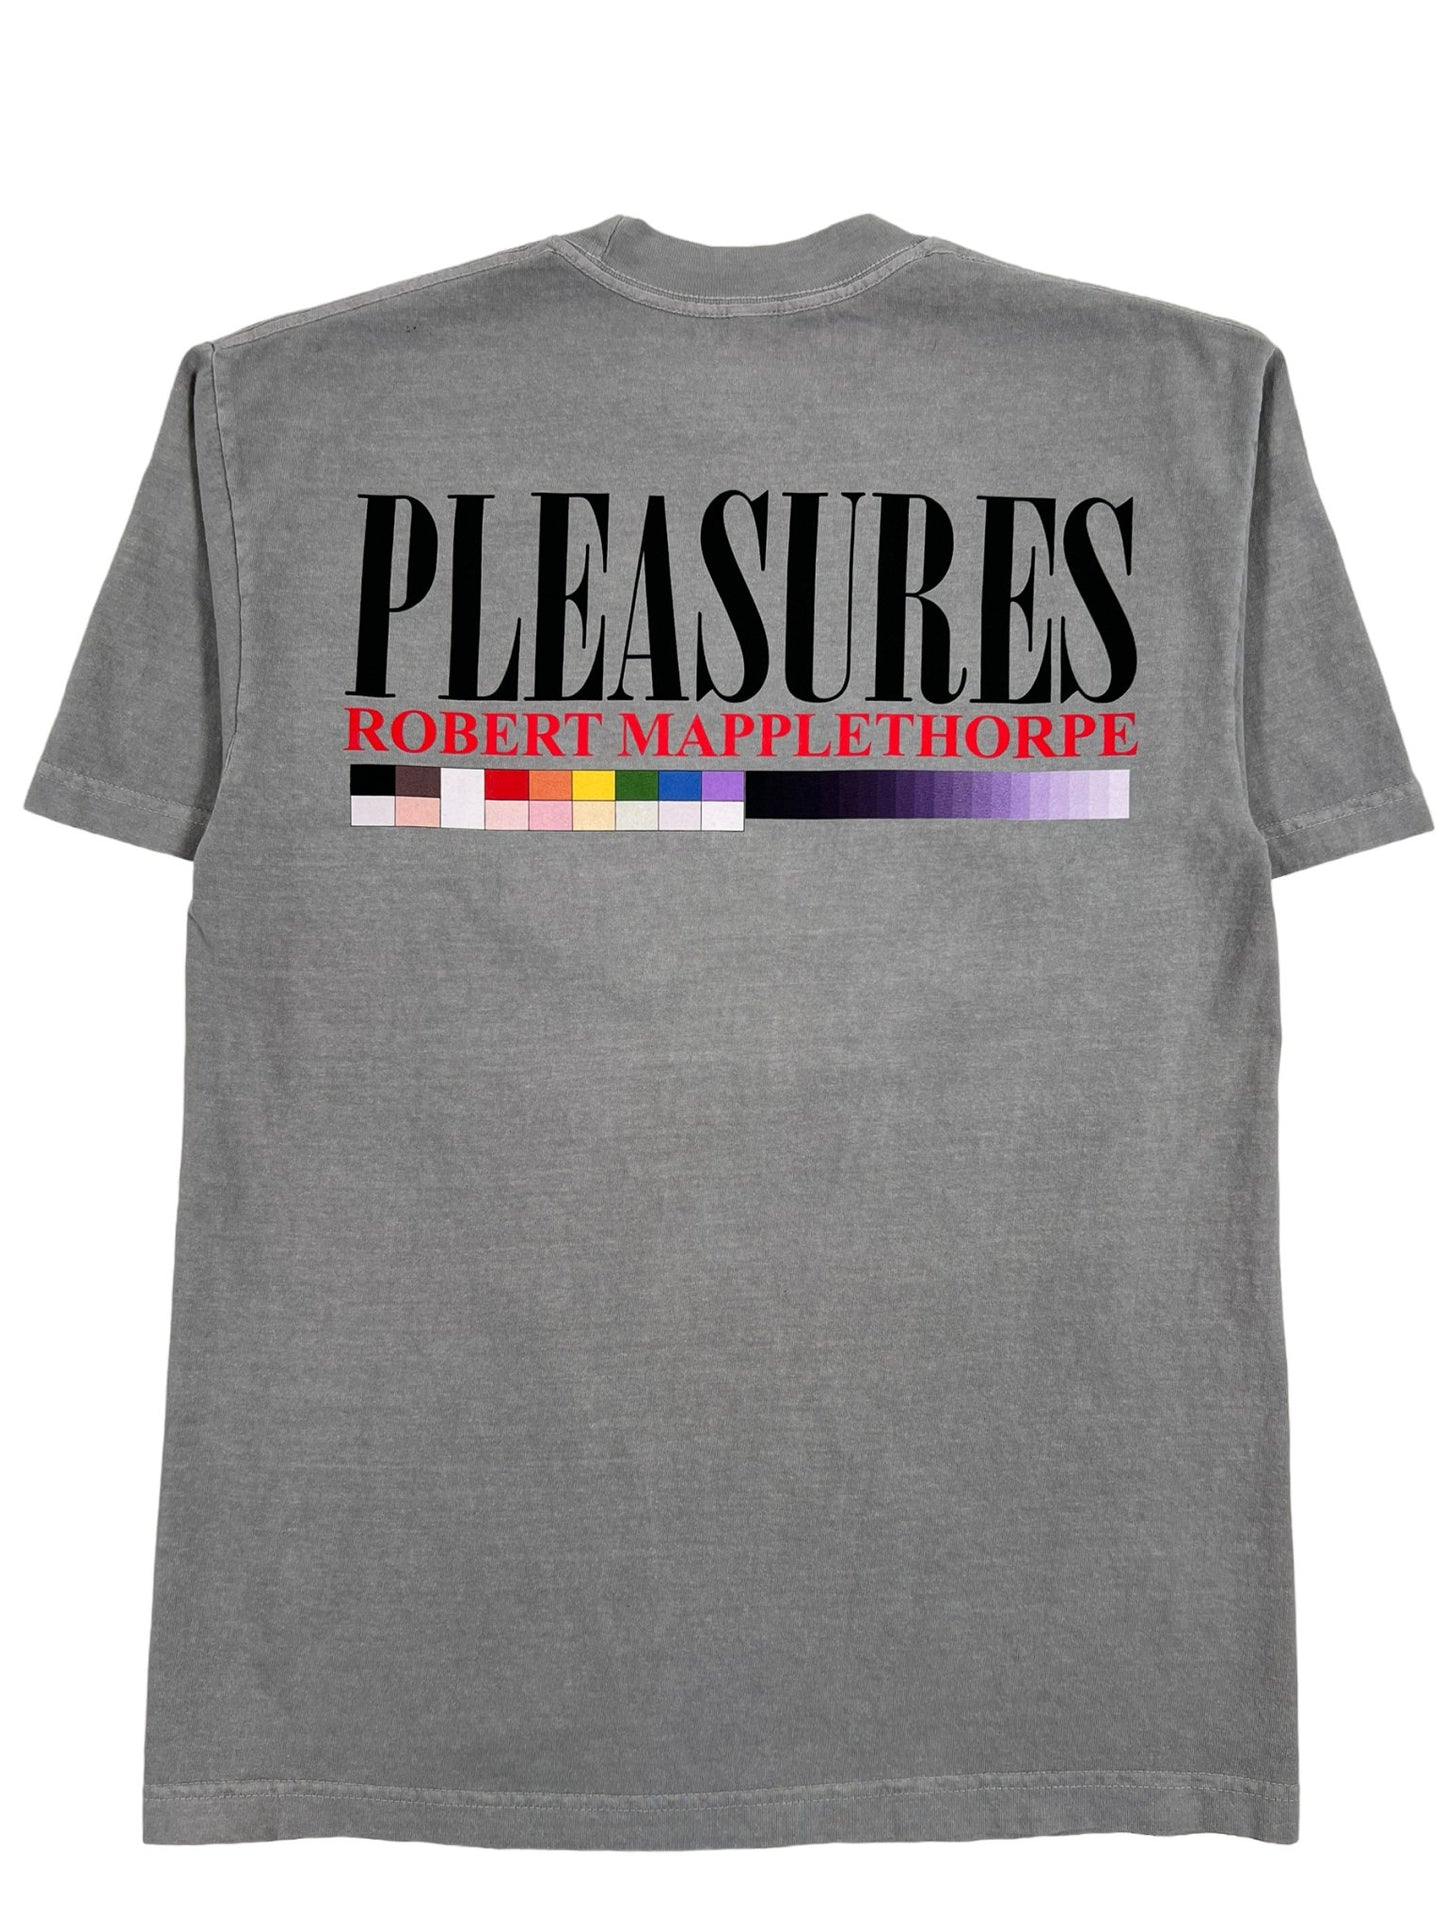 A comfortable grey T-shirt that says PLEASURES CROSS T-SHIRT GREY by PLEASURES.